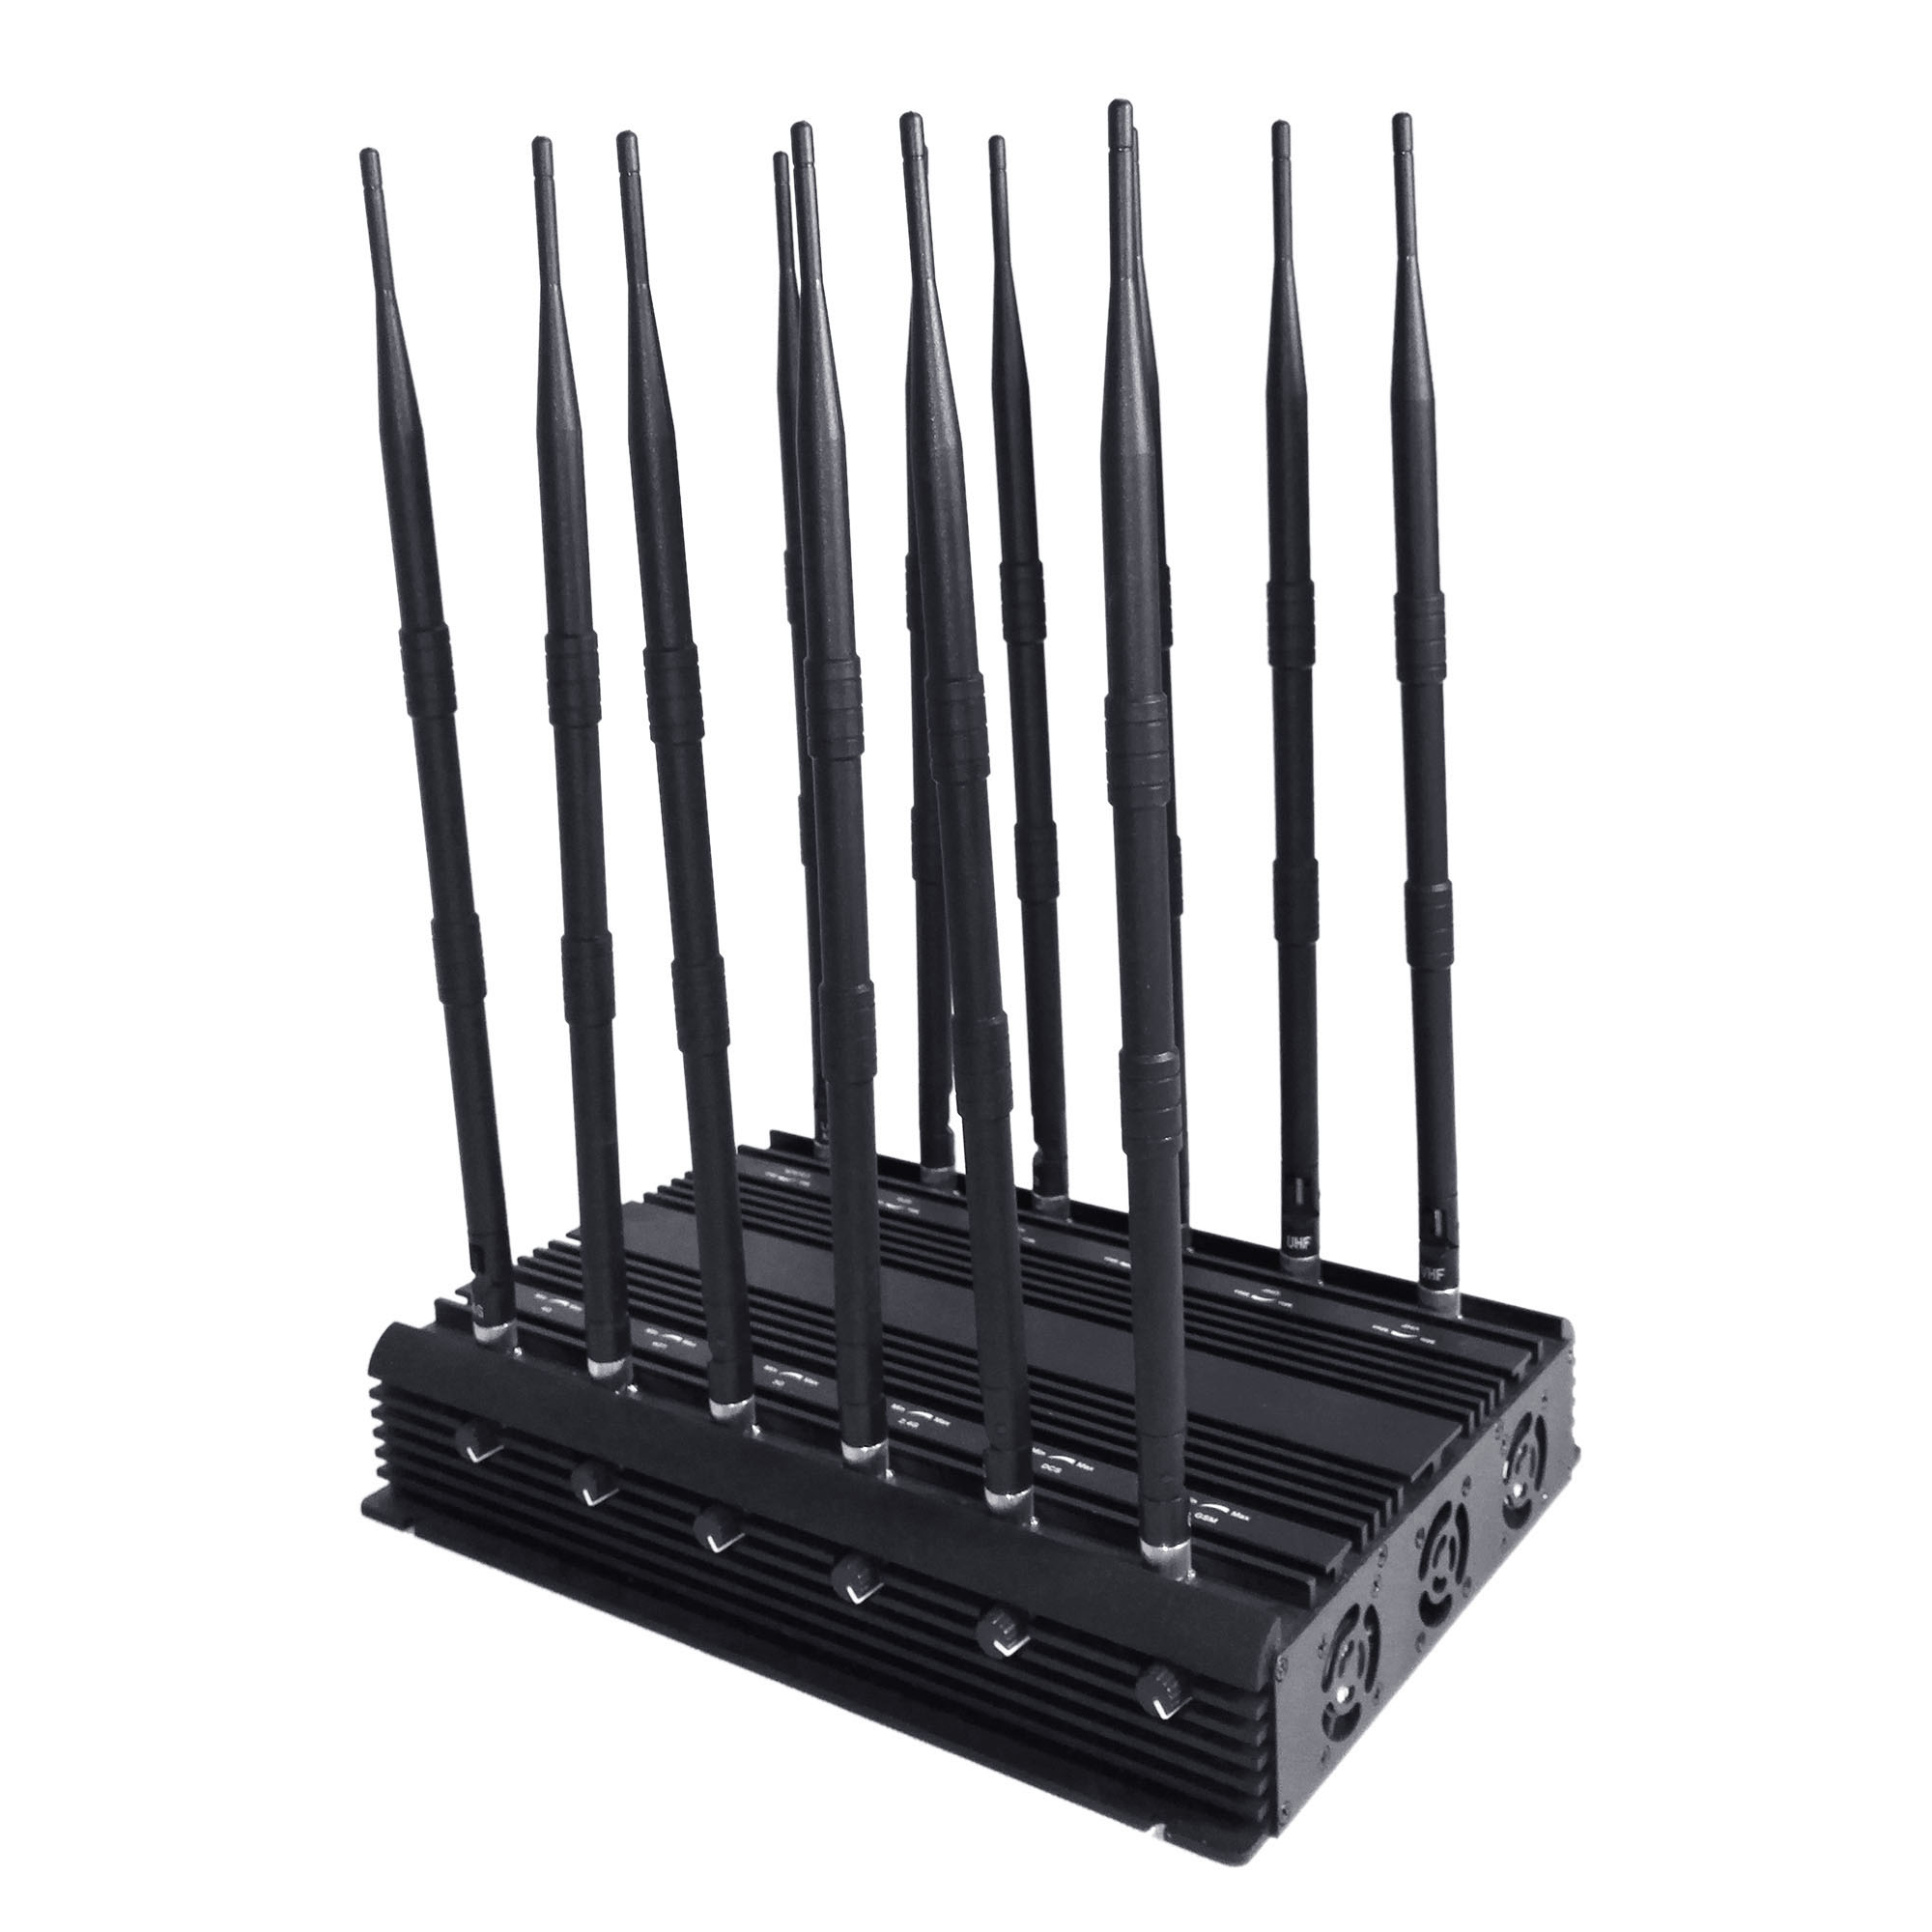 jammerall fm el paso - 12 Antennas High Power Wireless Cell Phone Jammer For 3G 4G Wi-Fi GPS LOJACK Signal Blockers